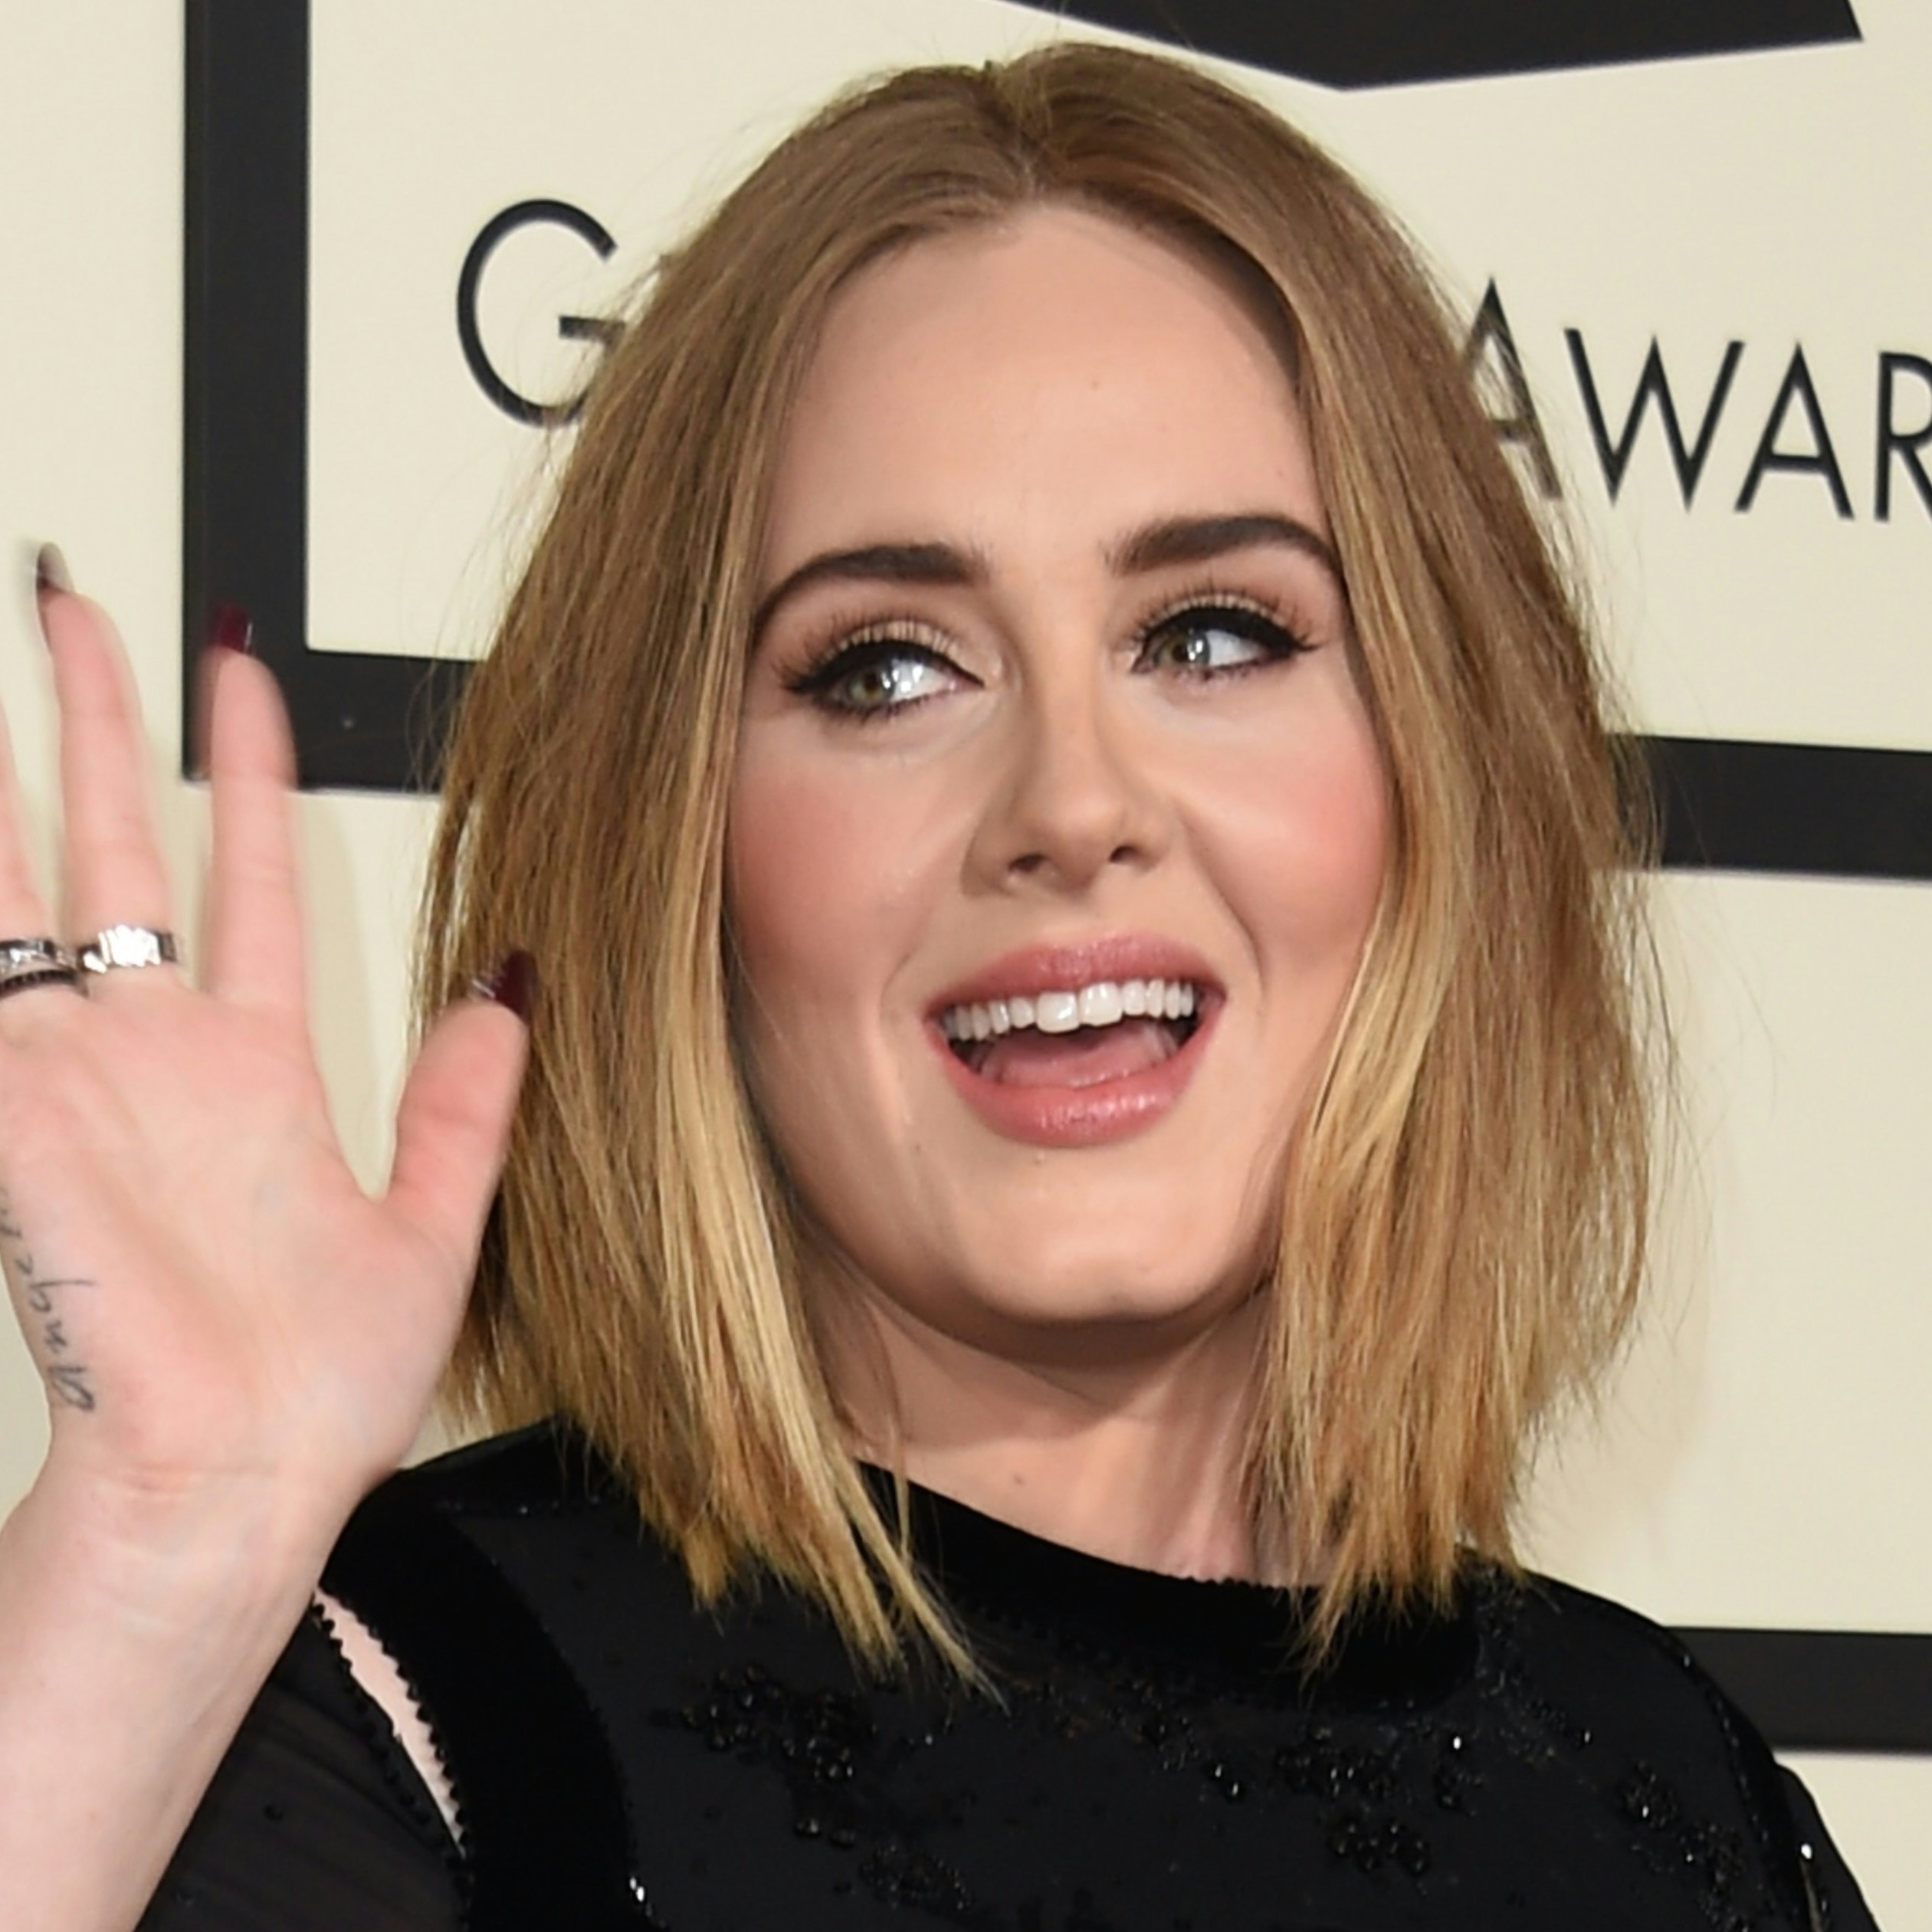 Adele Explains Audio Issues During Grammys 2016 Performance